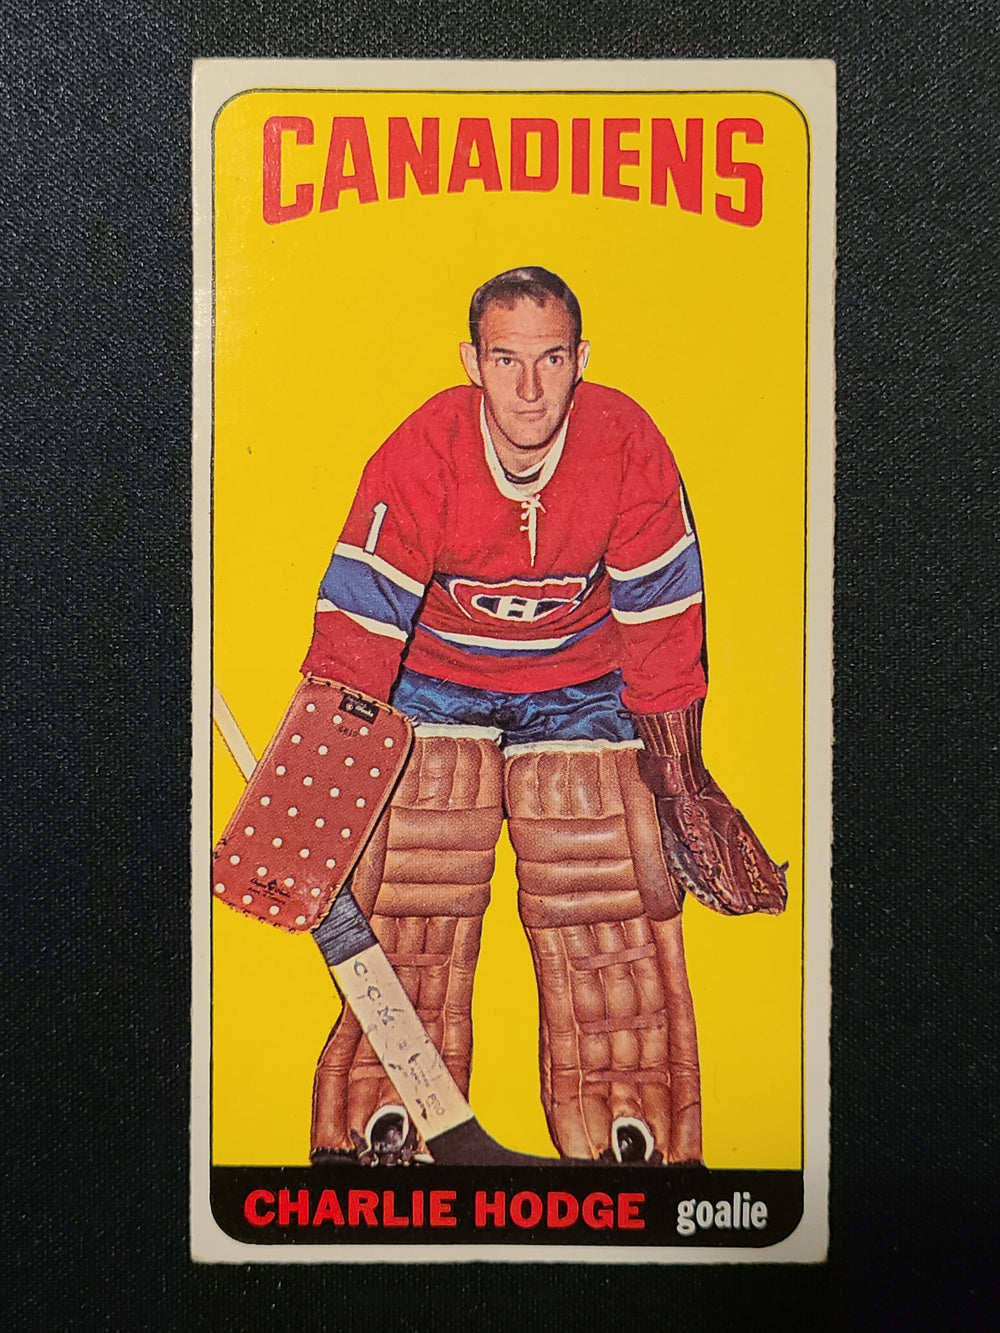 1964-65 Topps Tallboys #17 Charlie Hodge Montreal Canadiens **See Photos for Condition